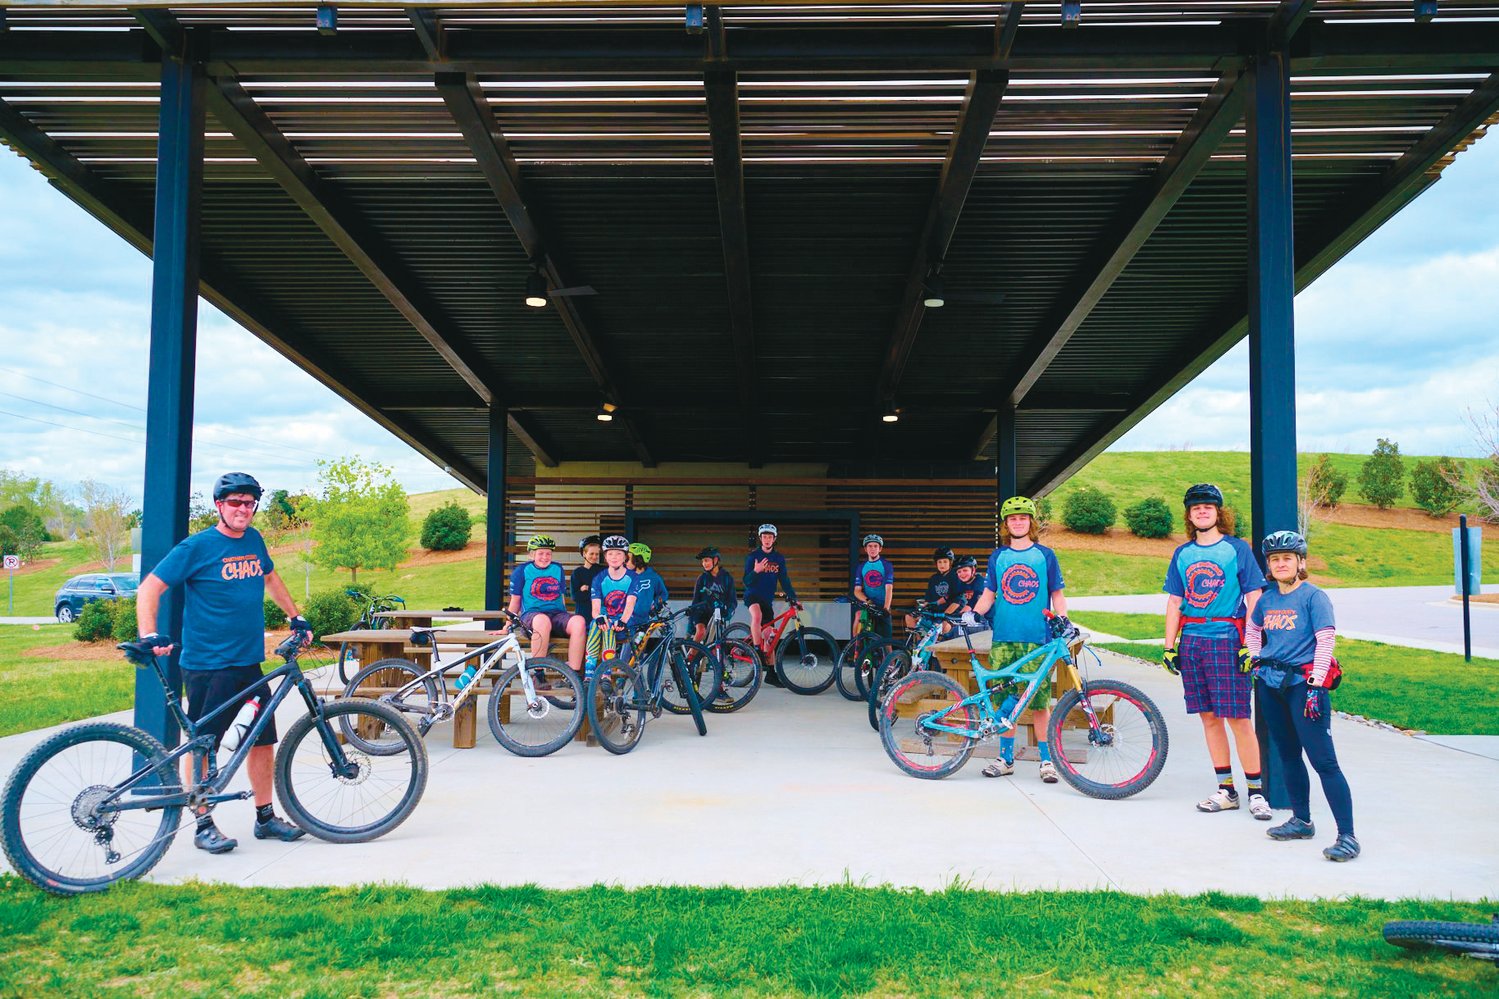 The Chatham County Chaos mountain biking team poses for a photo during a practice at Briar Chapel on April 9.